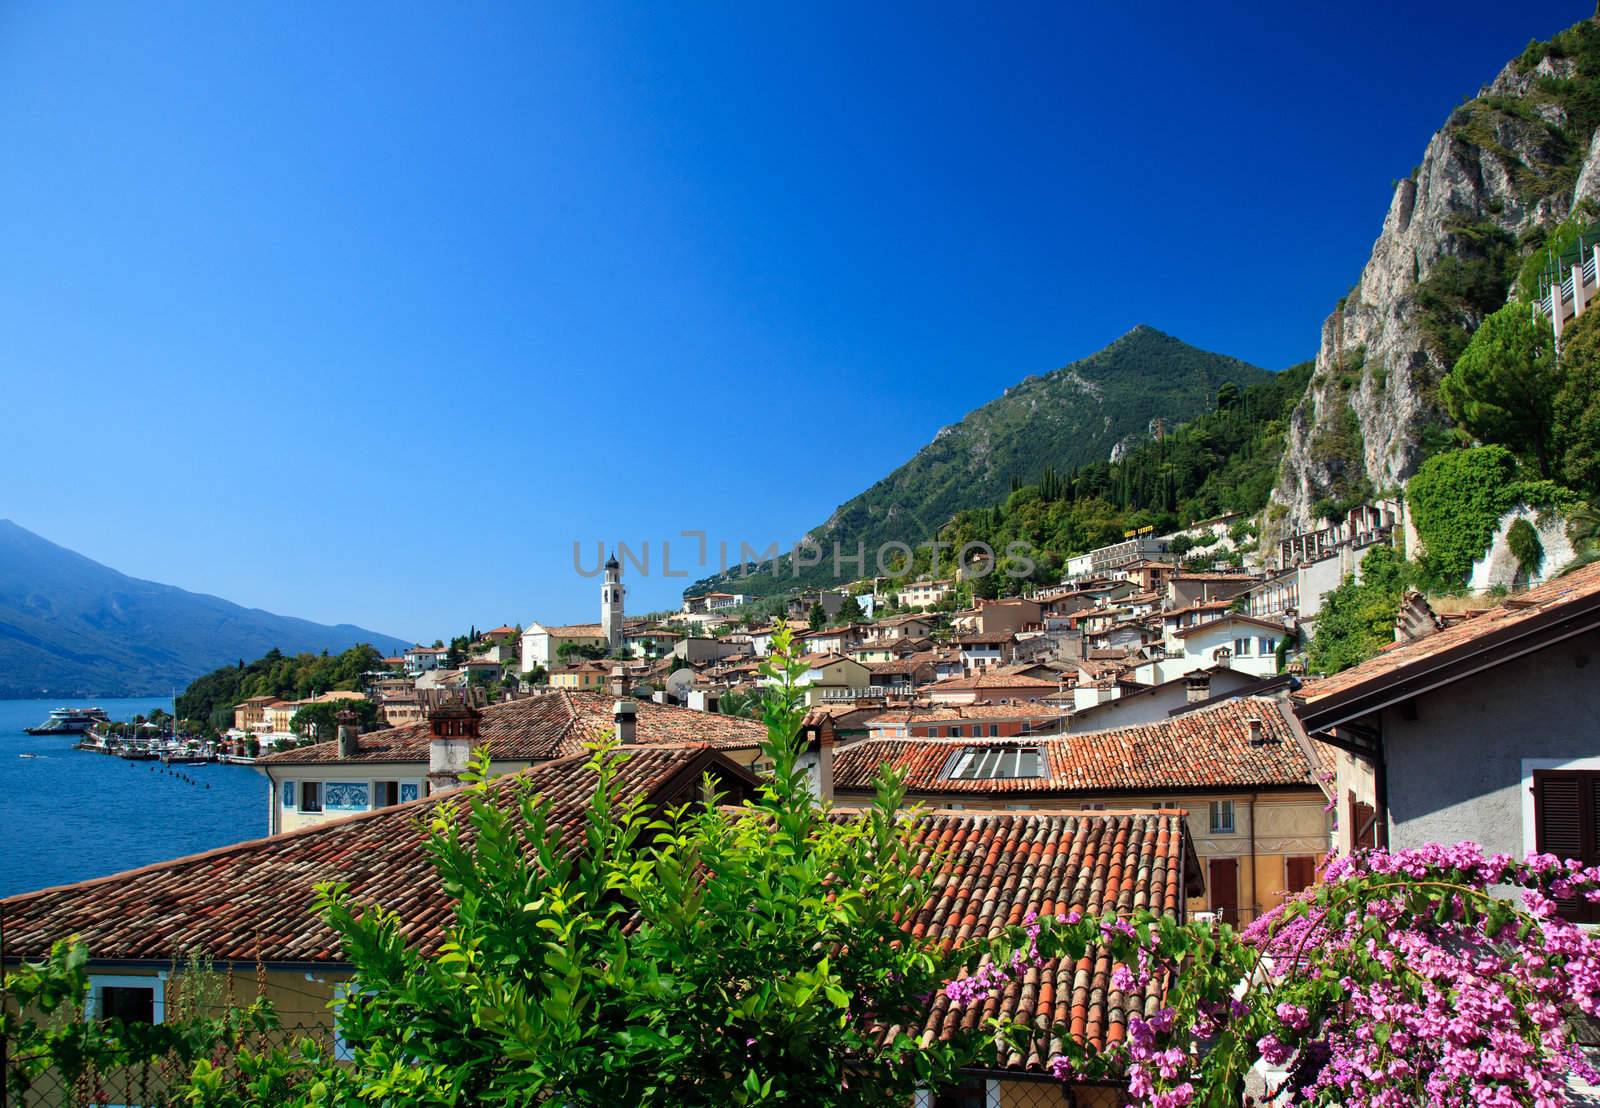 Flowers frame the rooftops of Limone on Lake Garda Italy